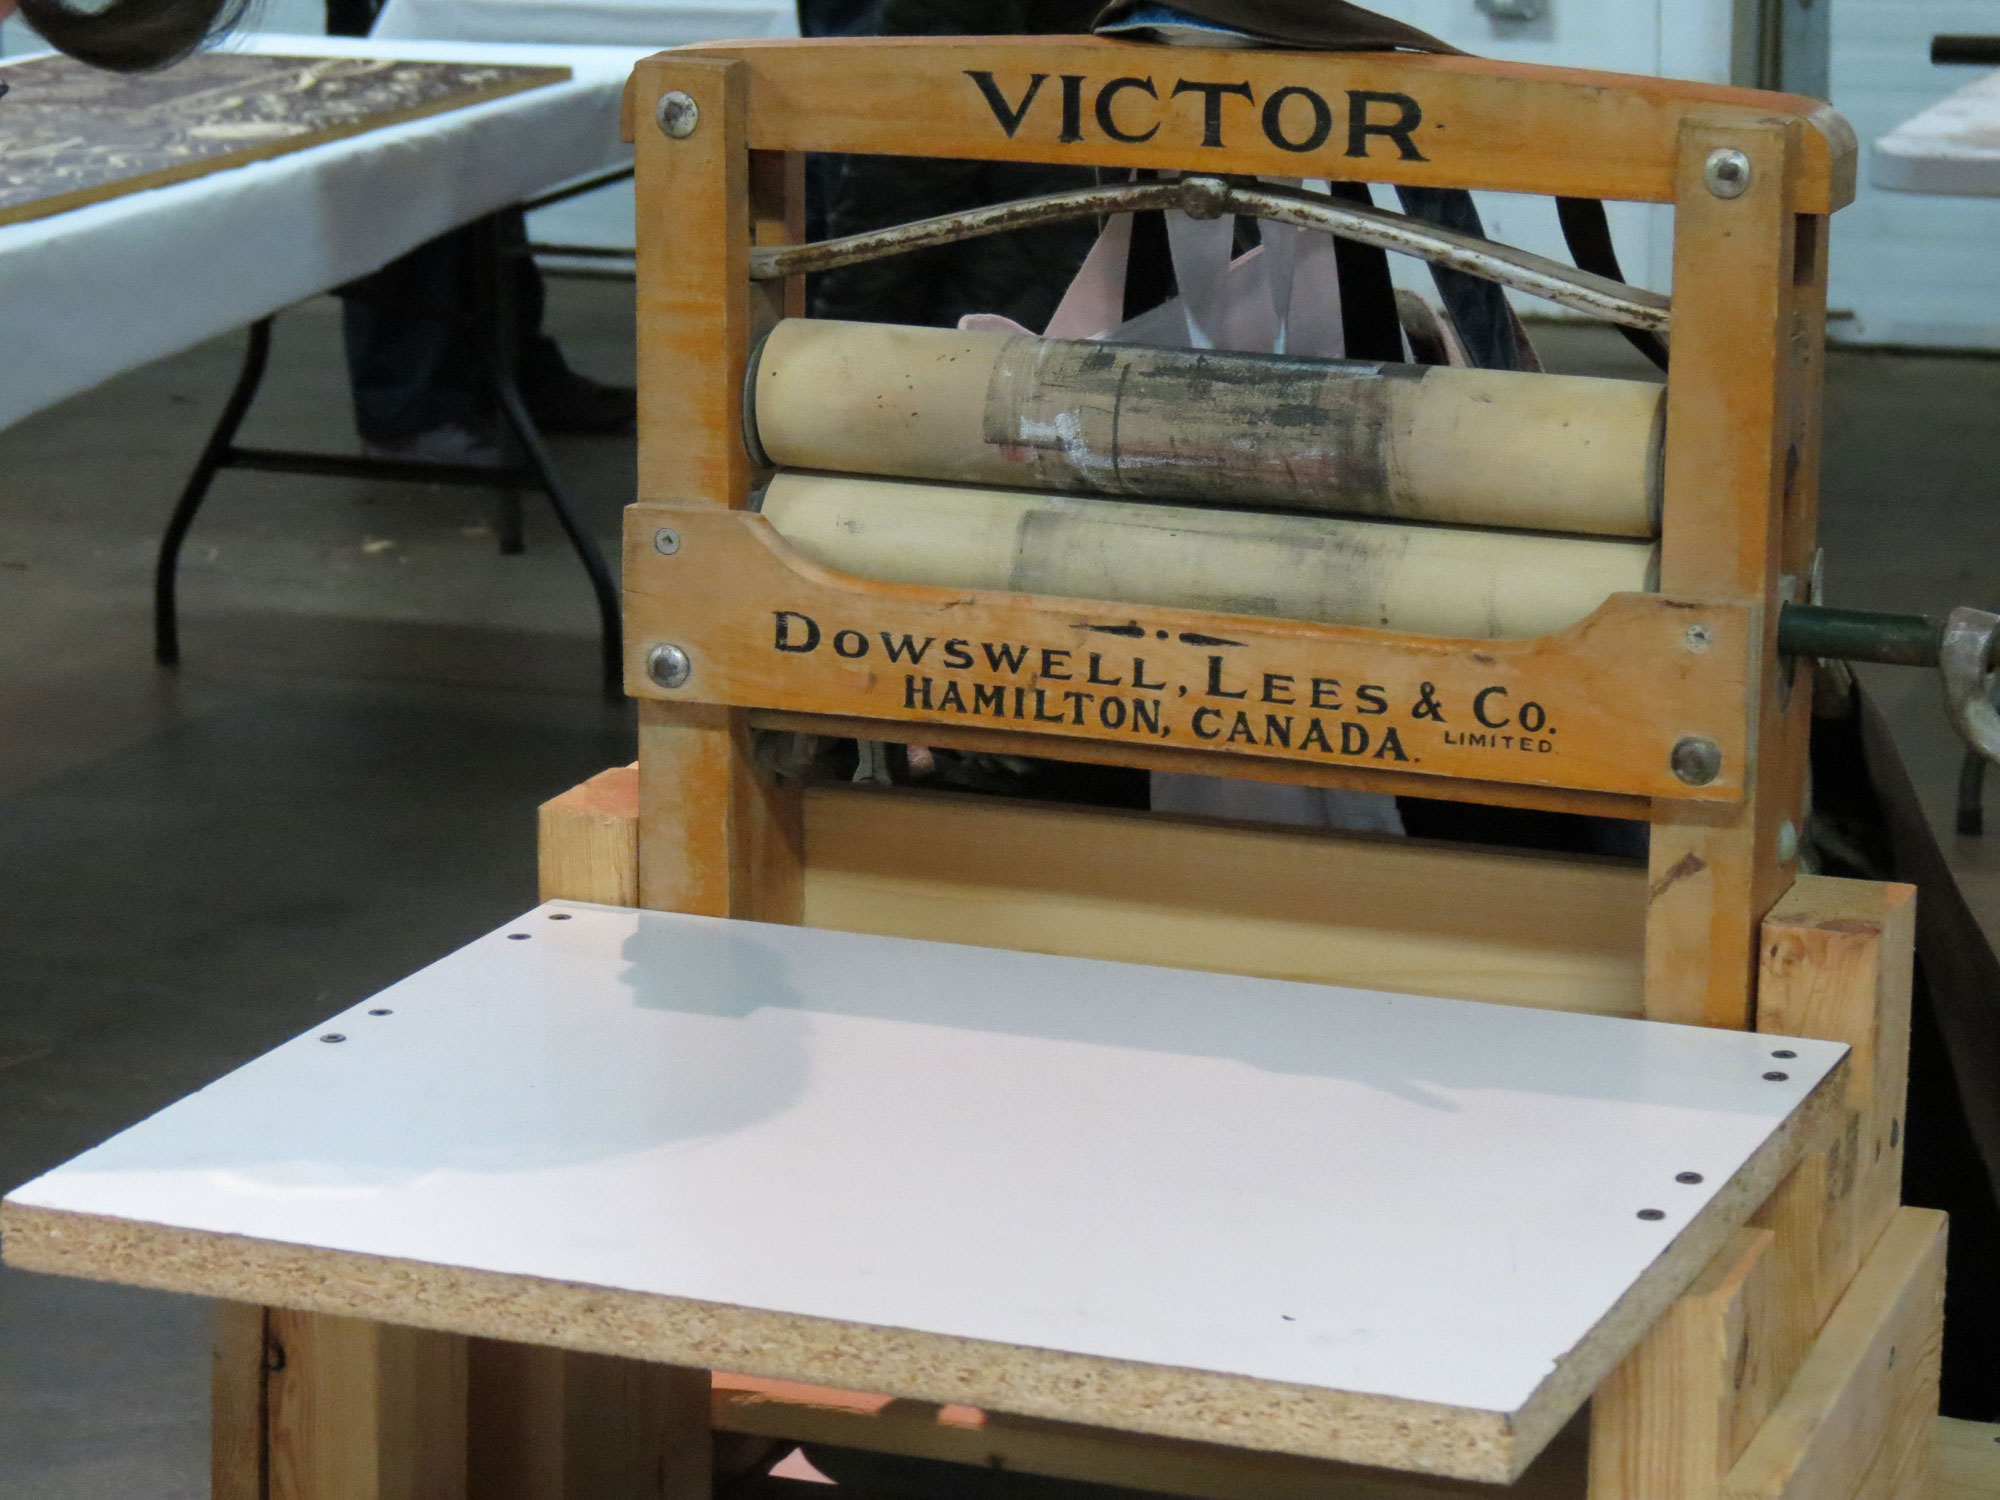 A wringer washer turned mini-printing press used in outreach workshops.